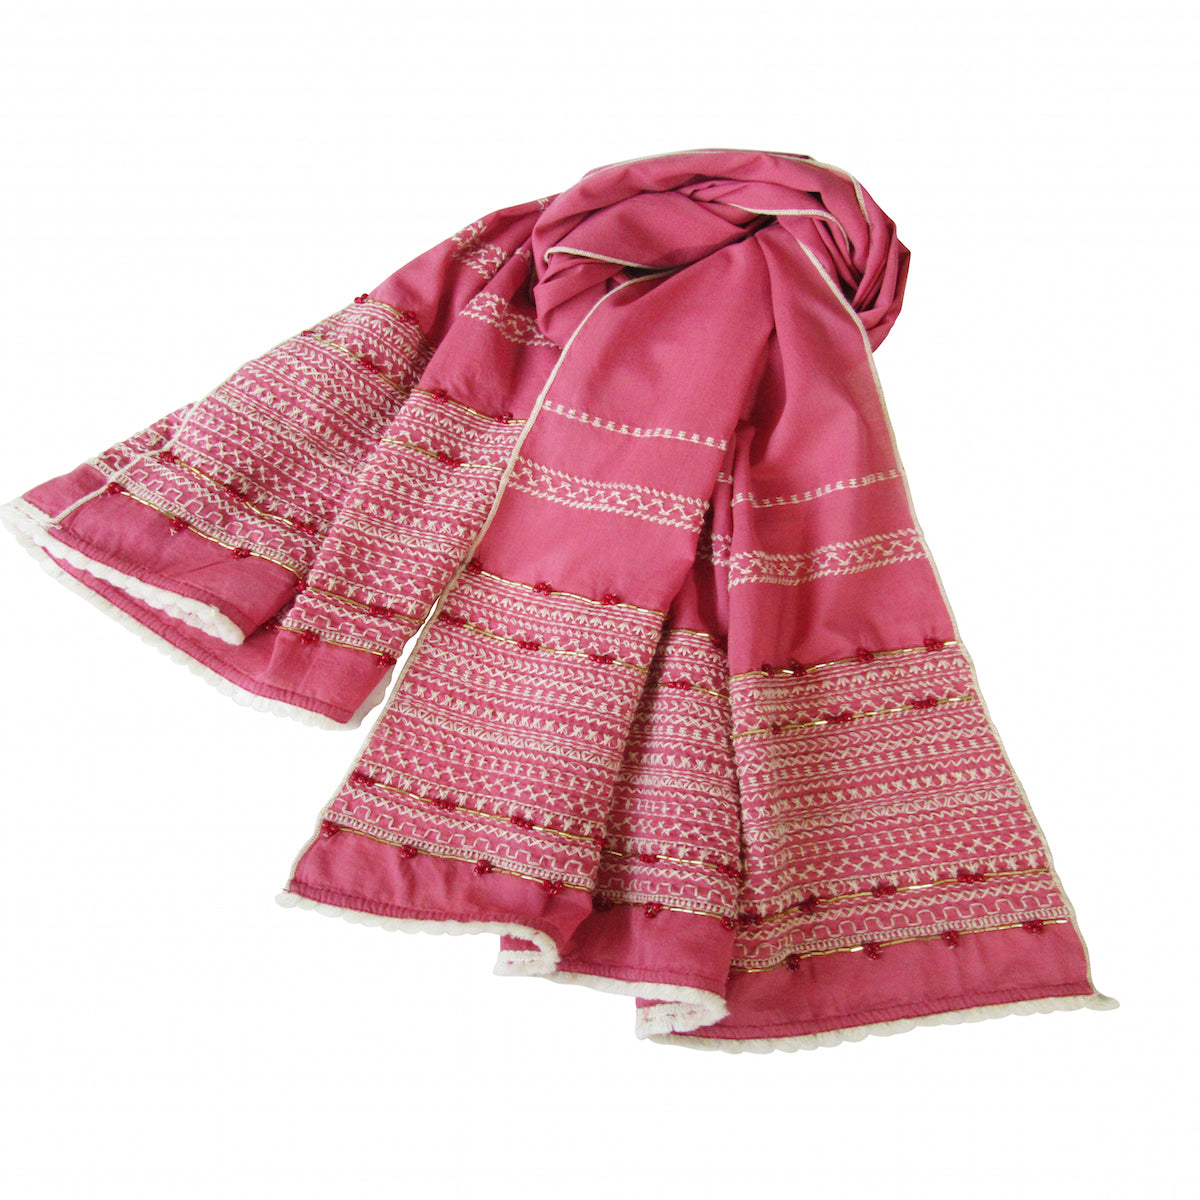 Rose Pink; Hand Embroidered Long Slim Scarf